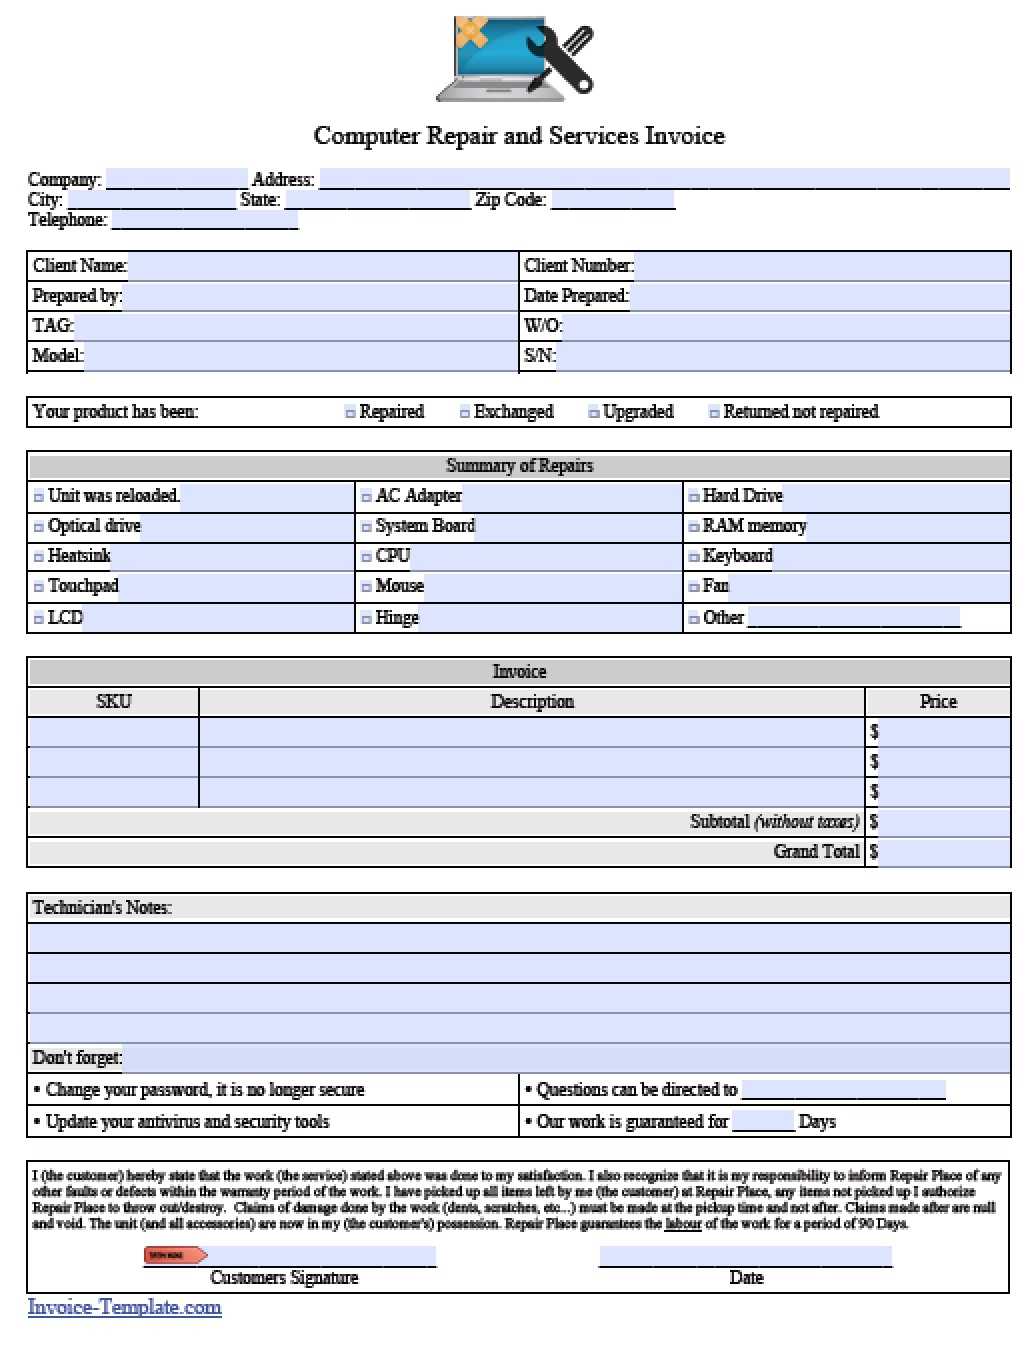 Free Computer Repair Service Invoice Template | Pdf | Word For Computer Maintenance Report Template